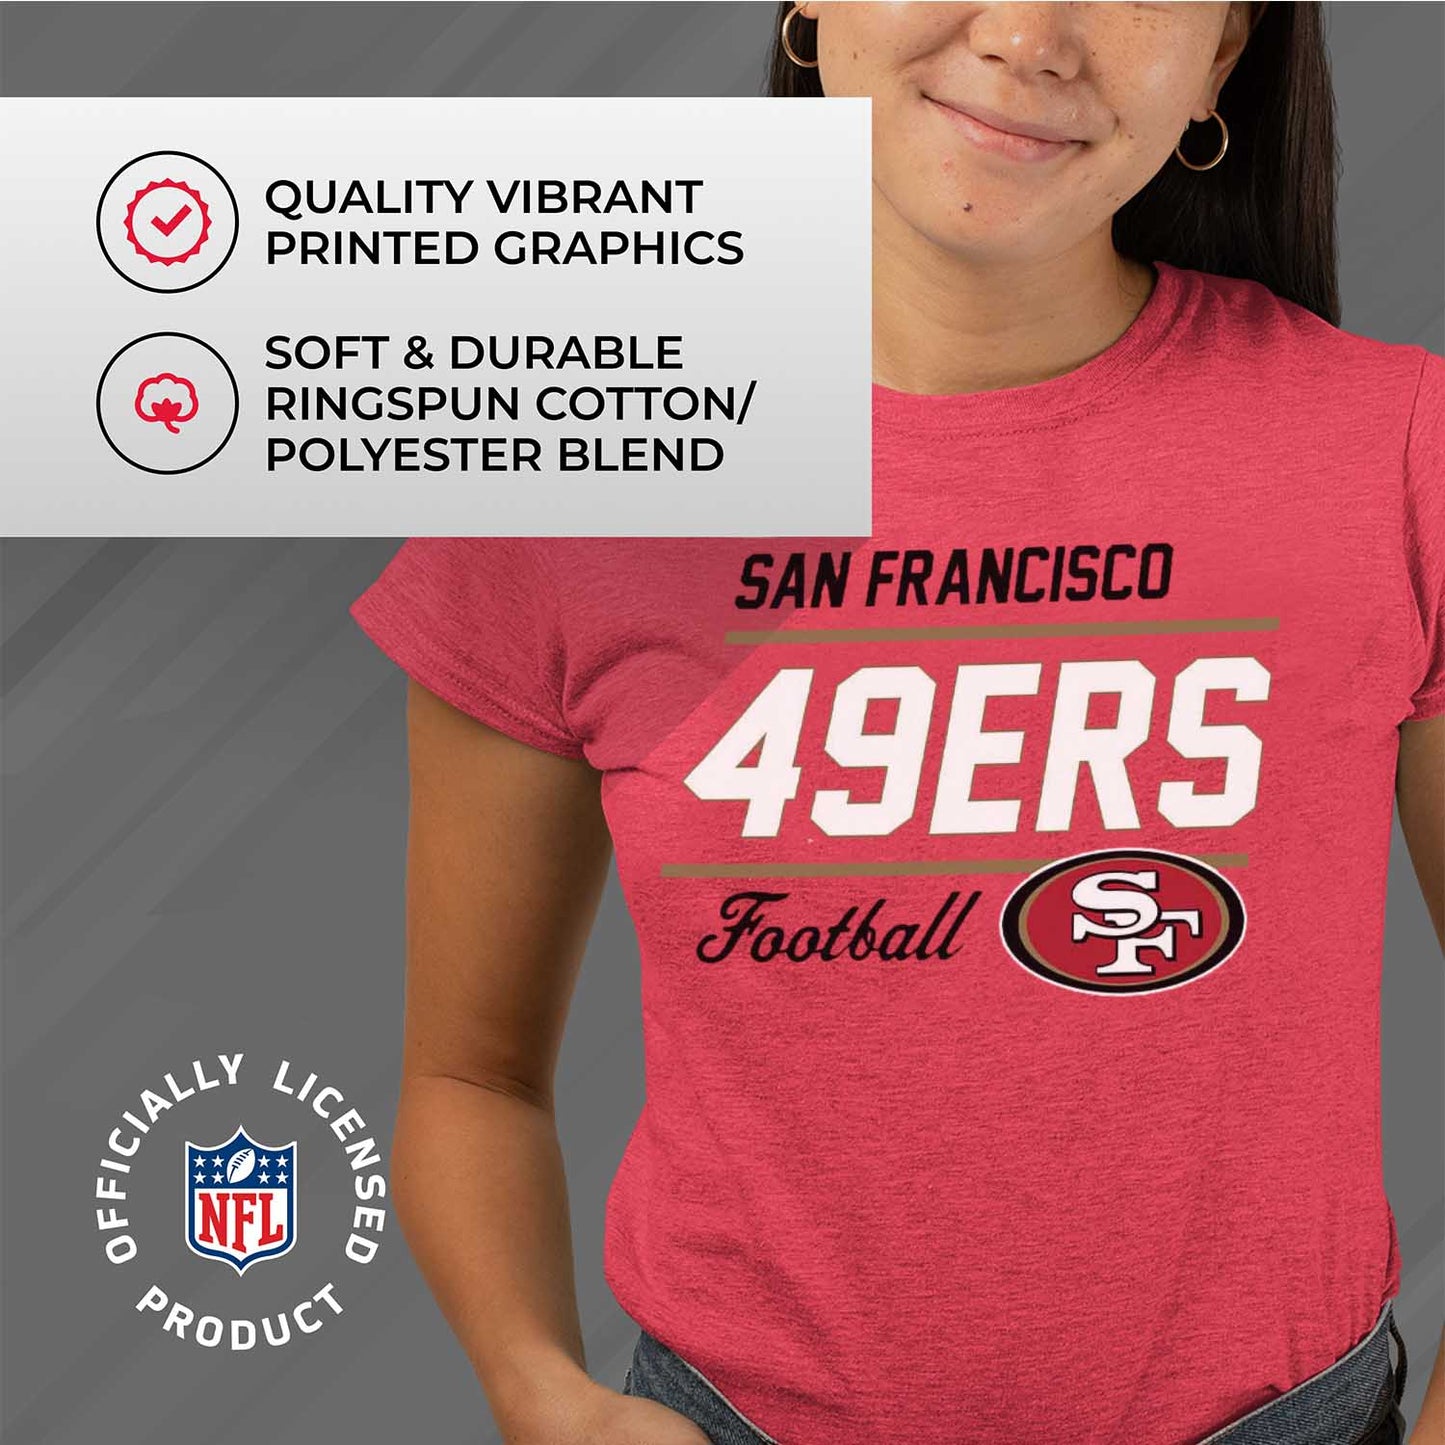 San Francisco 49ers NFL Gameday Women's Relaxed Fit T-shirt - Red